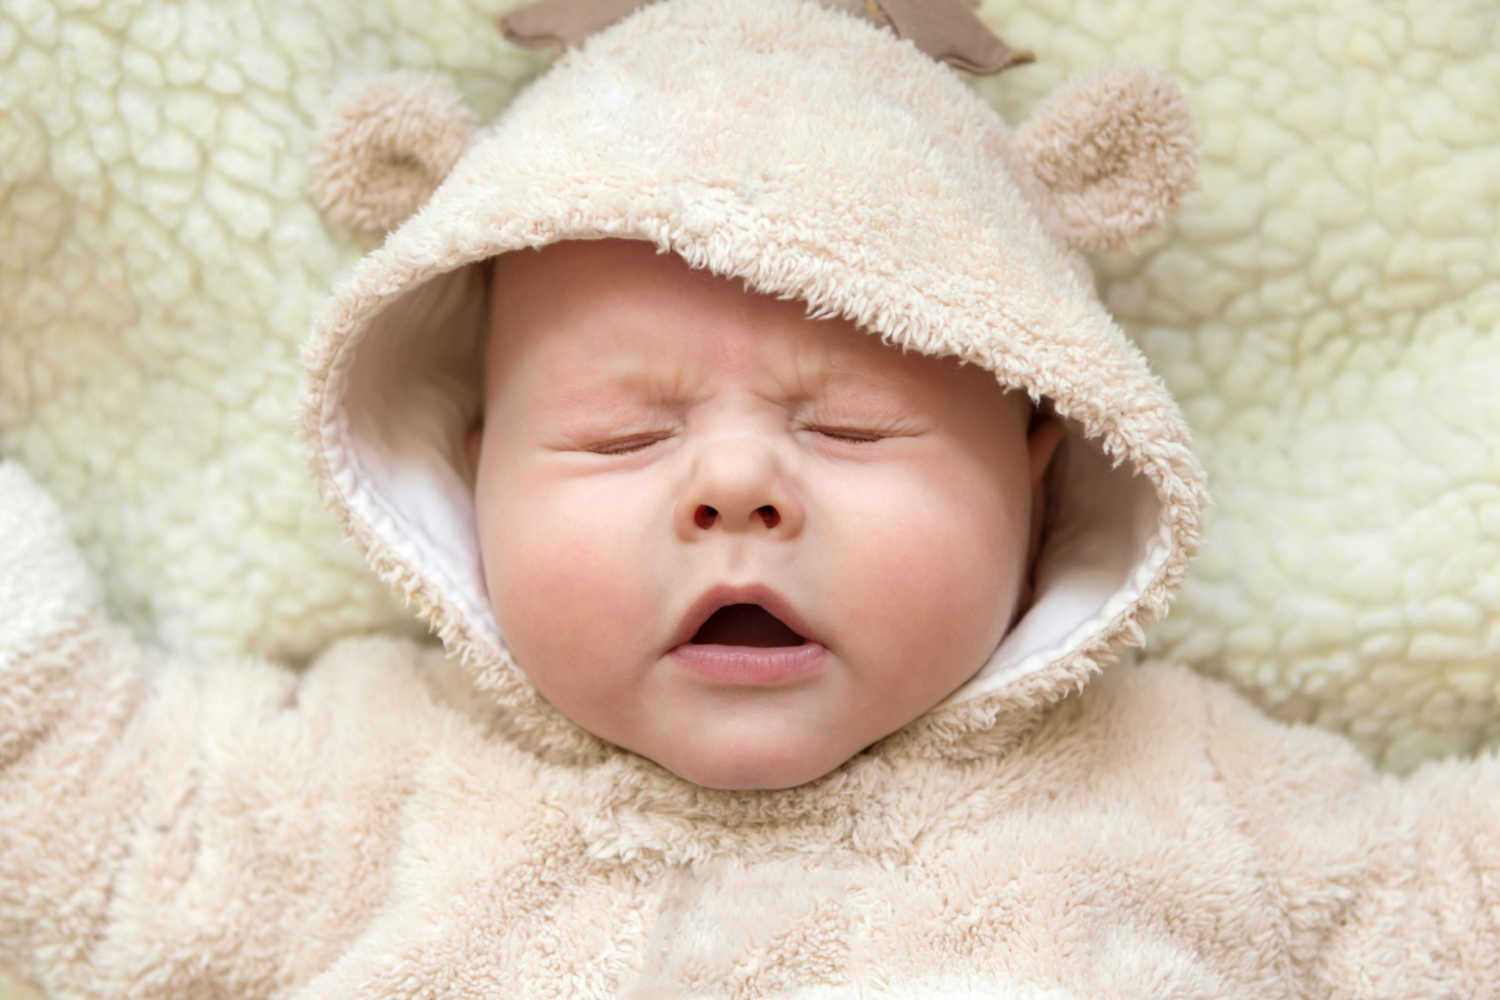 Baby Sneezing – Causes, Symptoms and Prevention